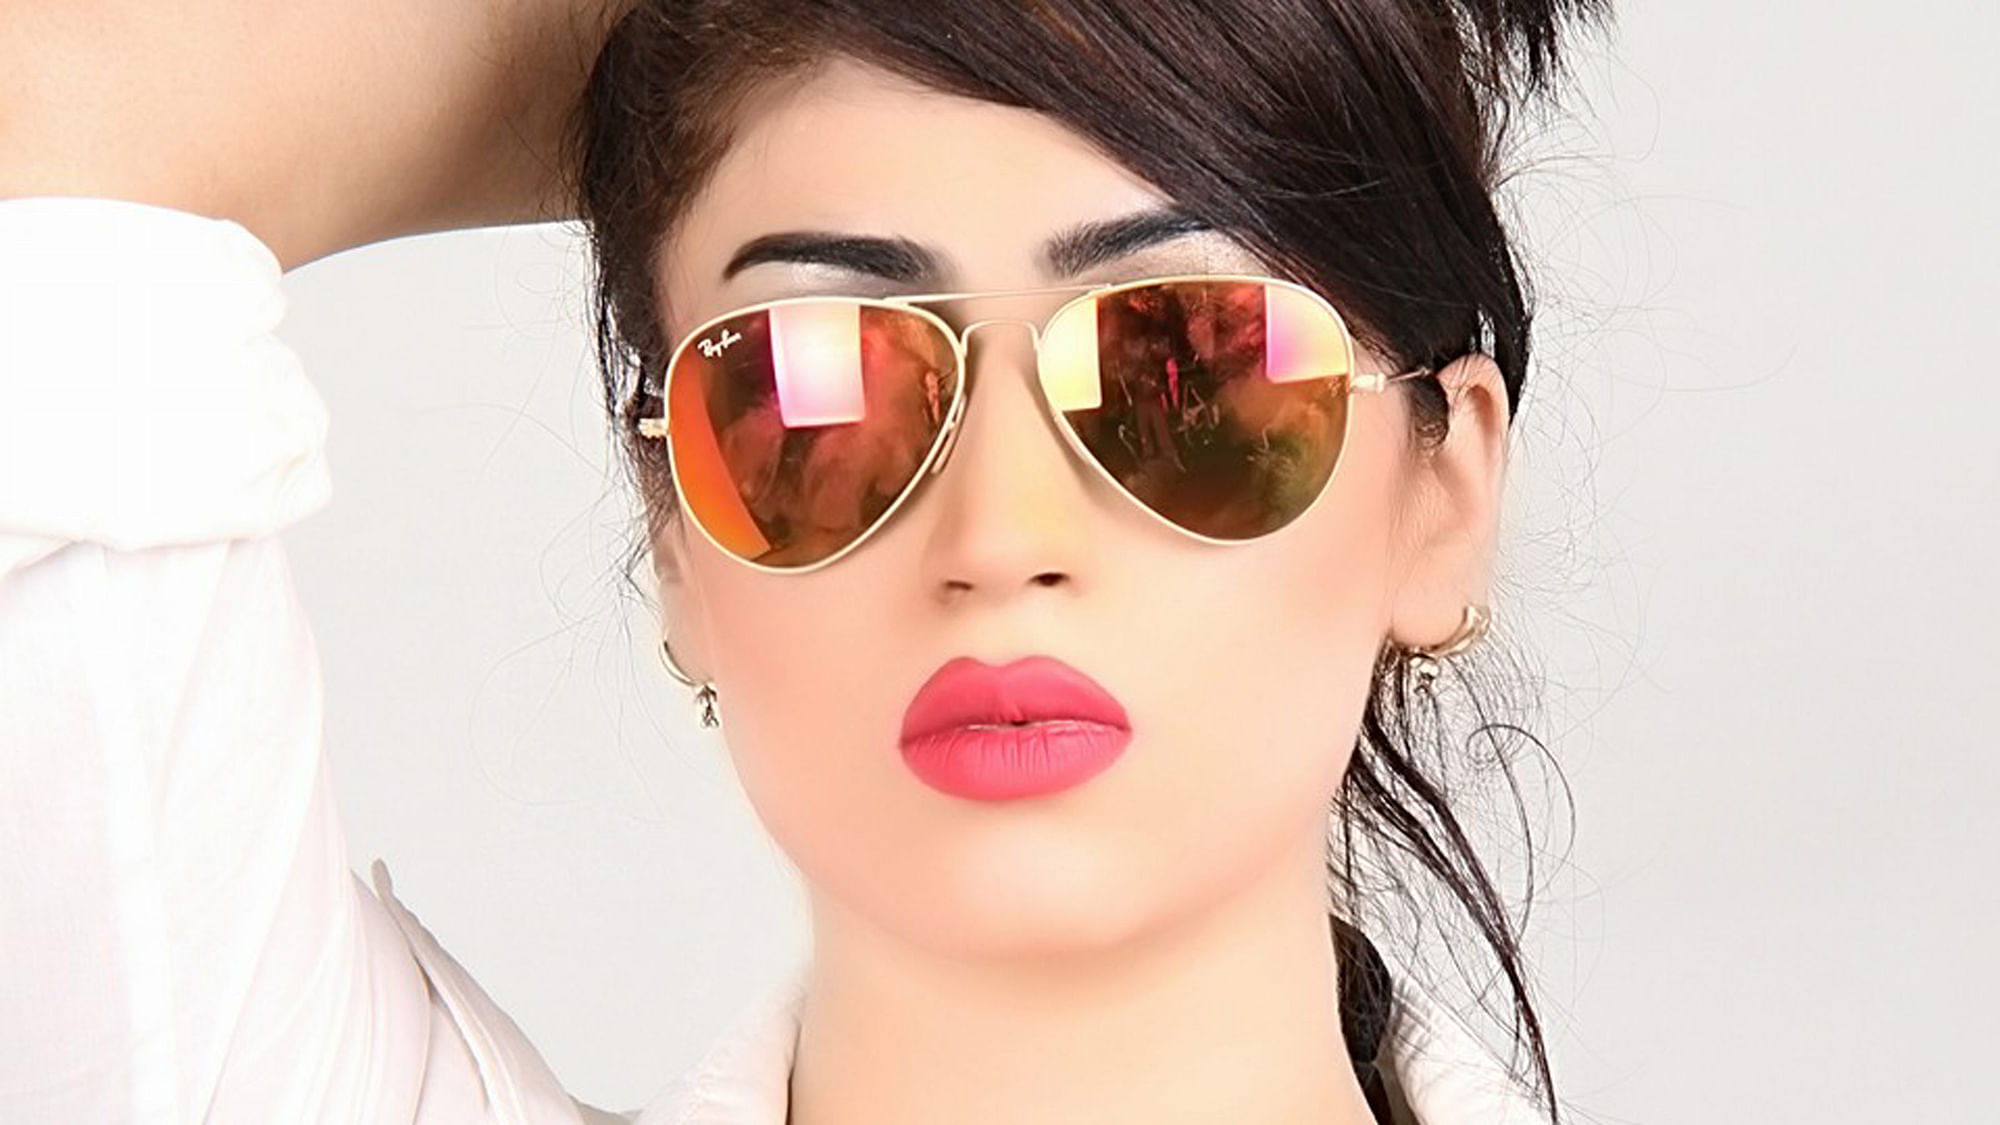 The media doesn’t want to discuss Qandeel Baloch, the woman who stood up for herself. (Photo Courtesy: Facebook/<a href="https://www.facebook.com/OfficialQandeelBaloch/photos">Qandeel Baloch Official</a>)